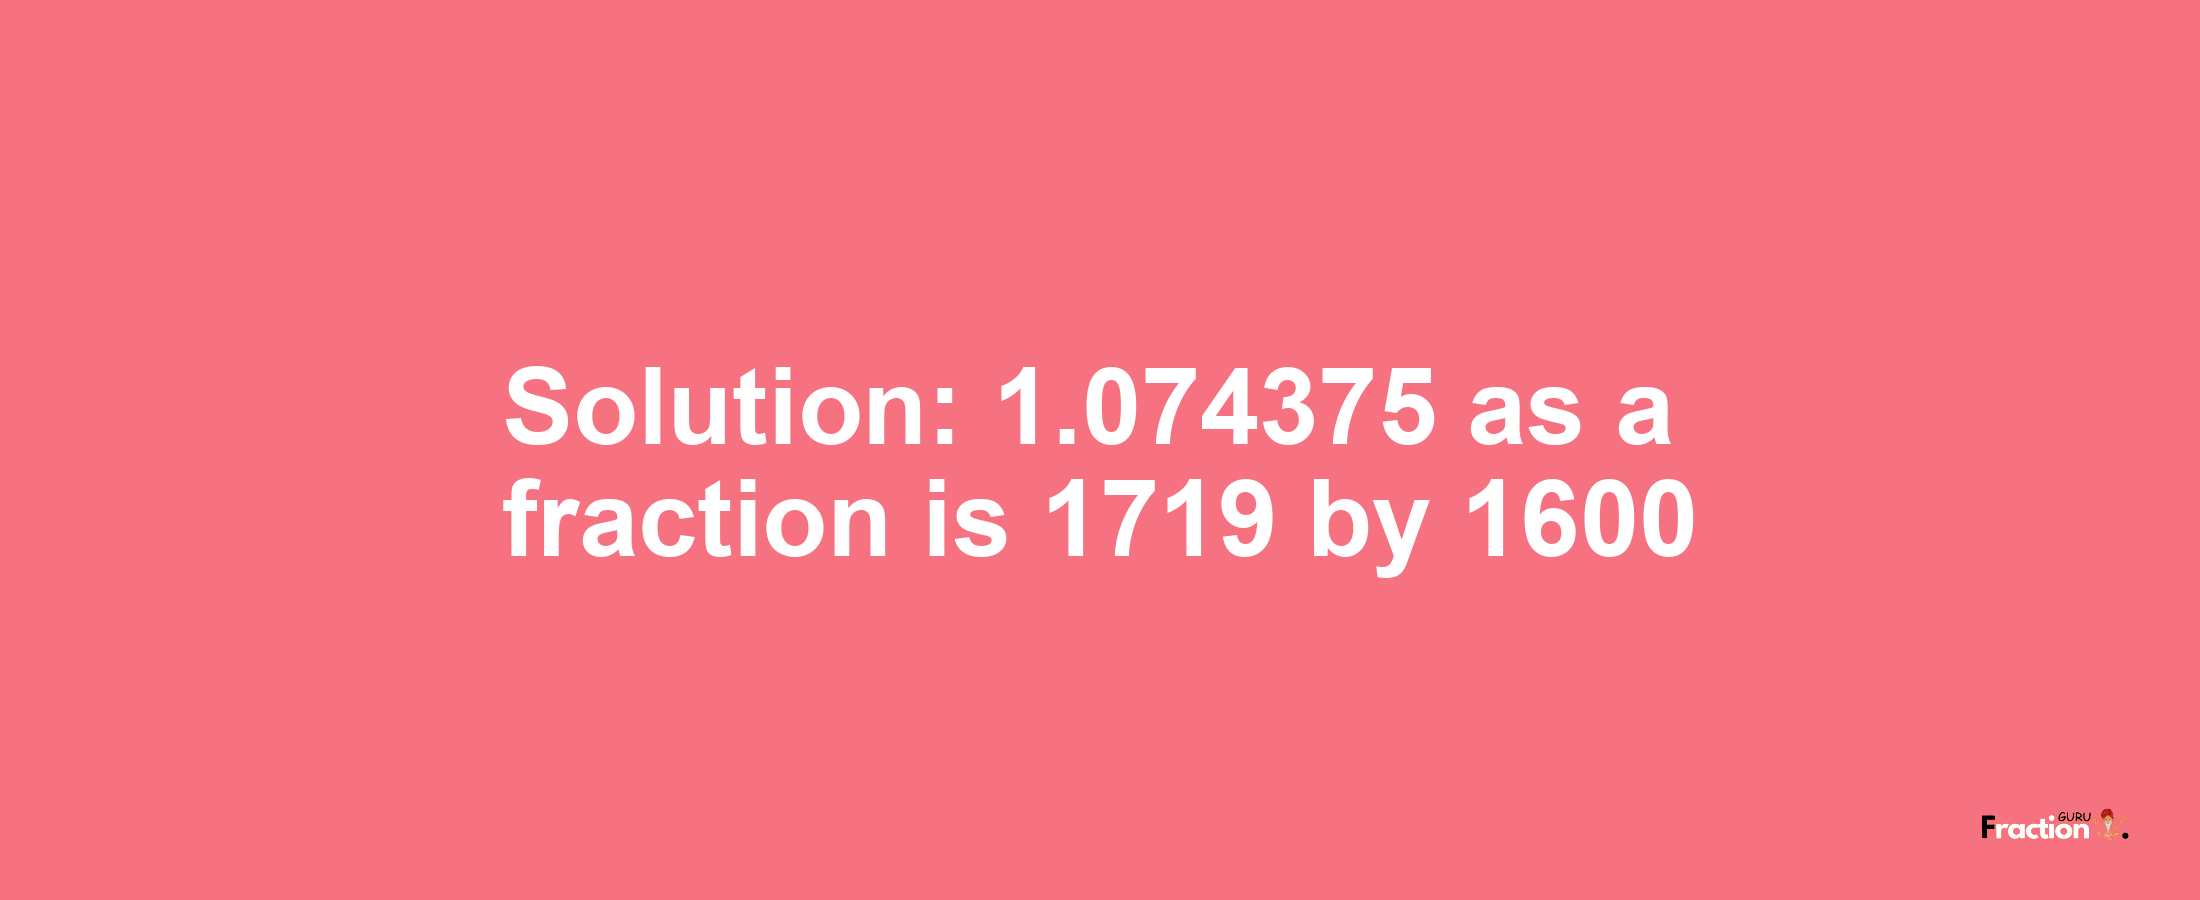 Solution:1.074375 as a fraction is 1719/1600